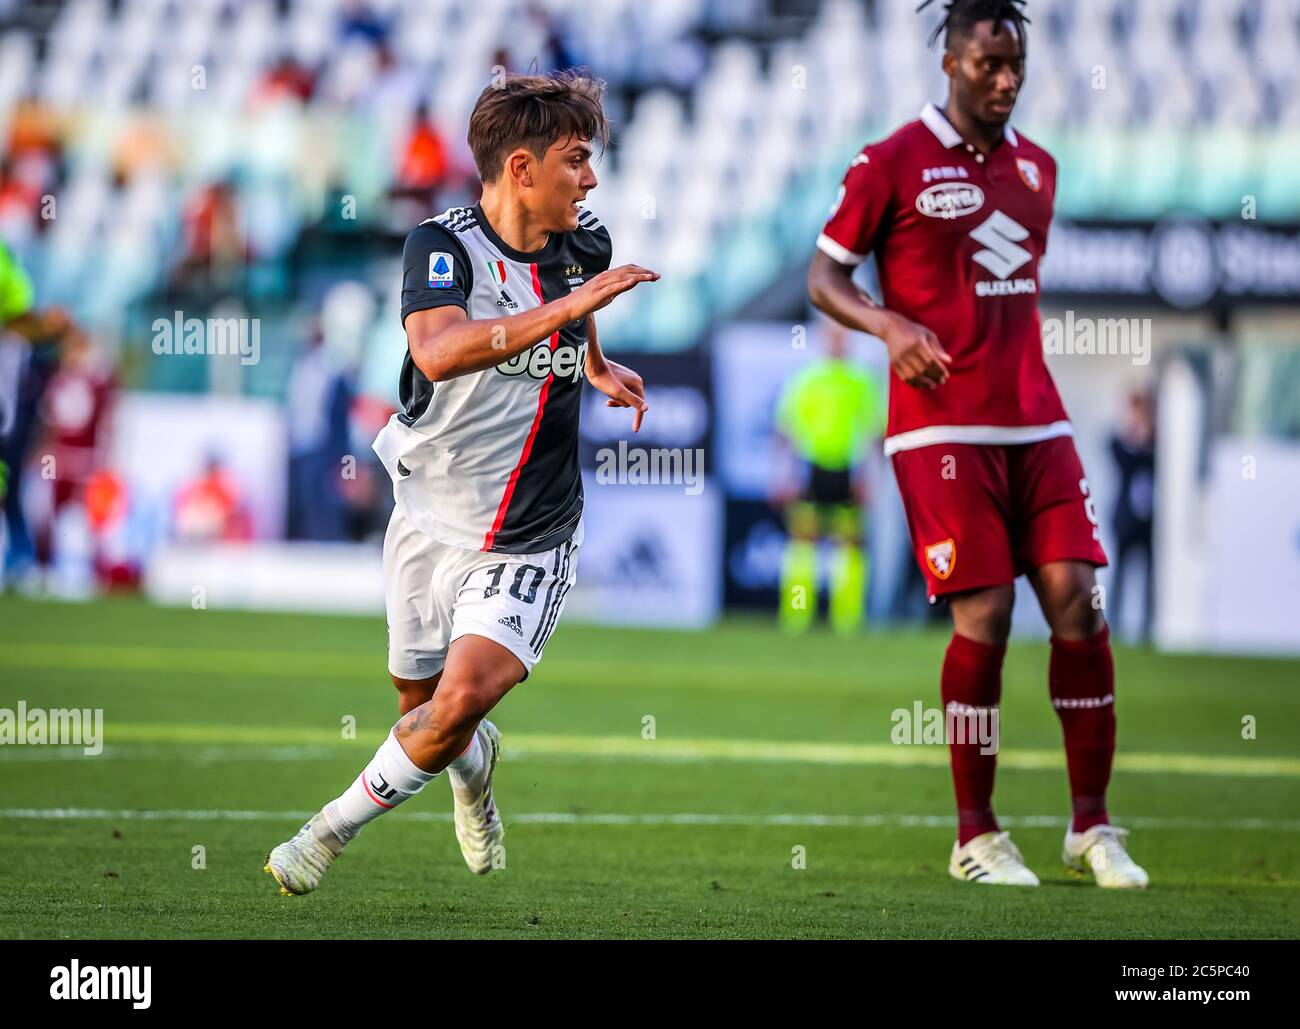 Turin, Italy, 04 Jul 2020, Paulo Dybala of Juventus during the Serie A  2019/20 match between Juventus vs Torino FC at the Allianz Stadium, Turin,  Italy on July 04, 2020 - Photo